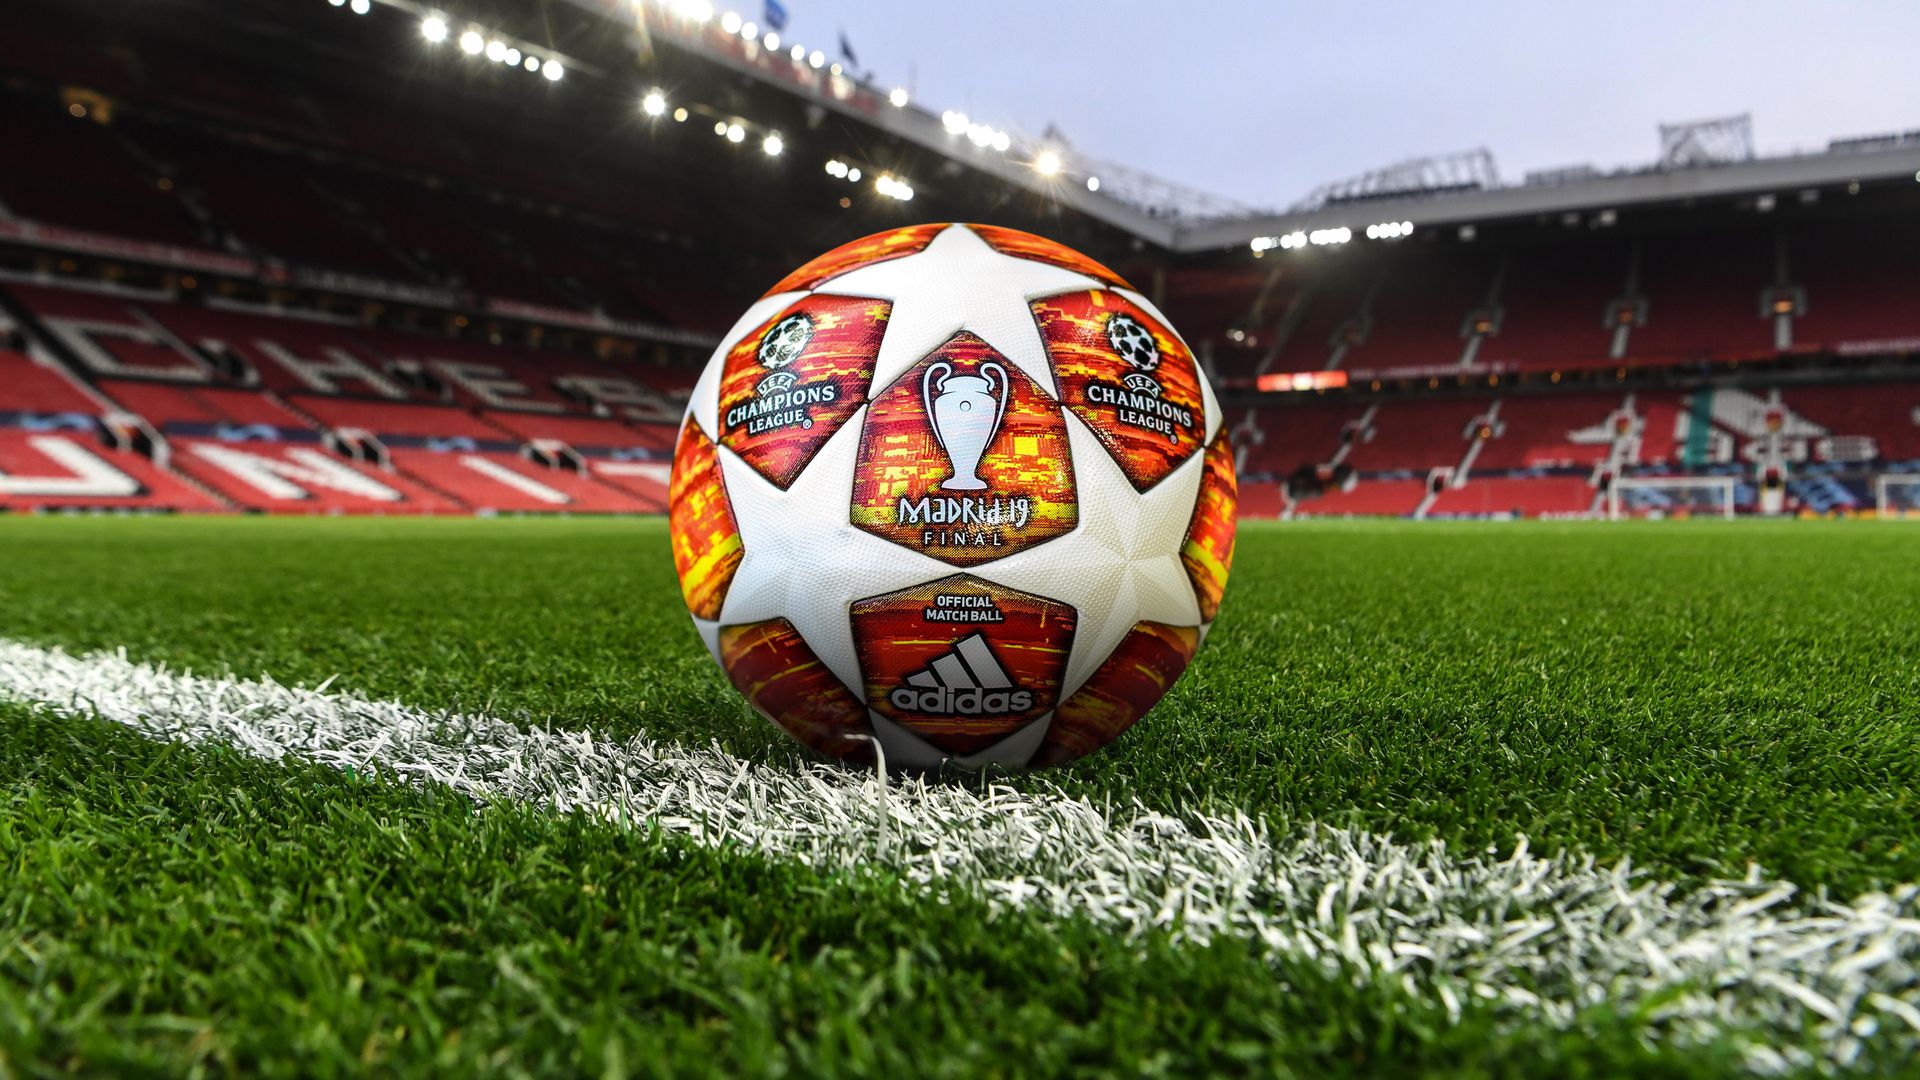 Man United Discover Champions League Quarter Final Opponents 15 March 19 Manchester United